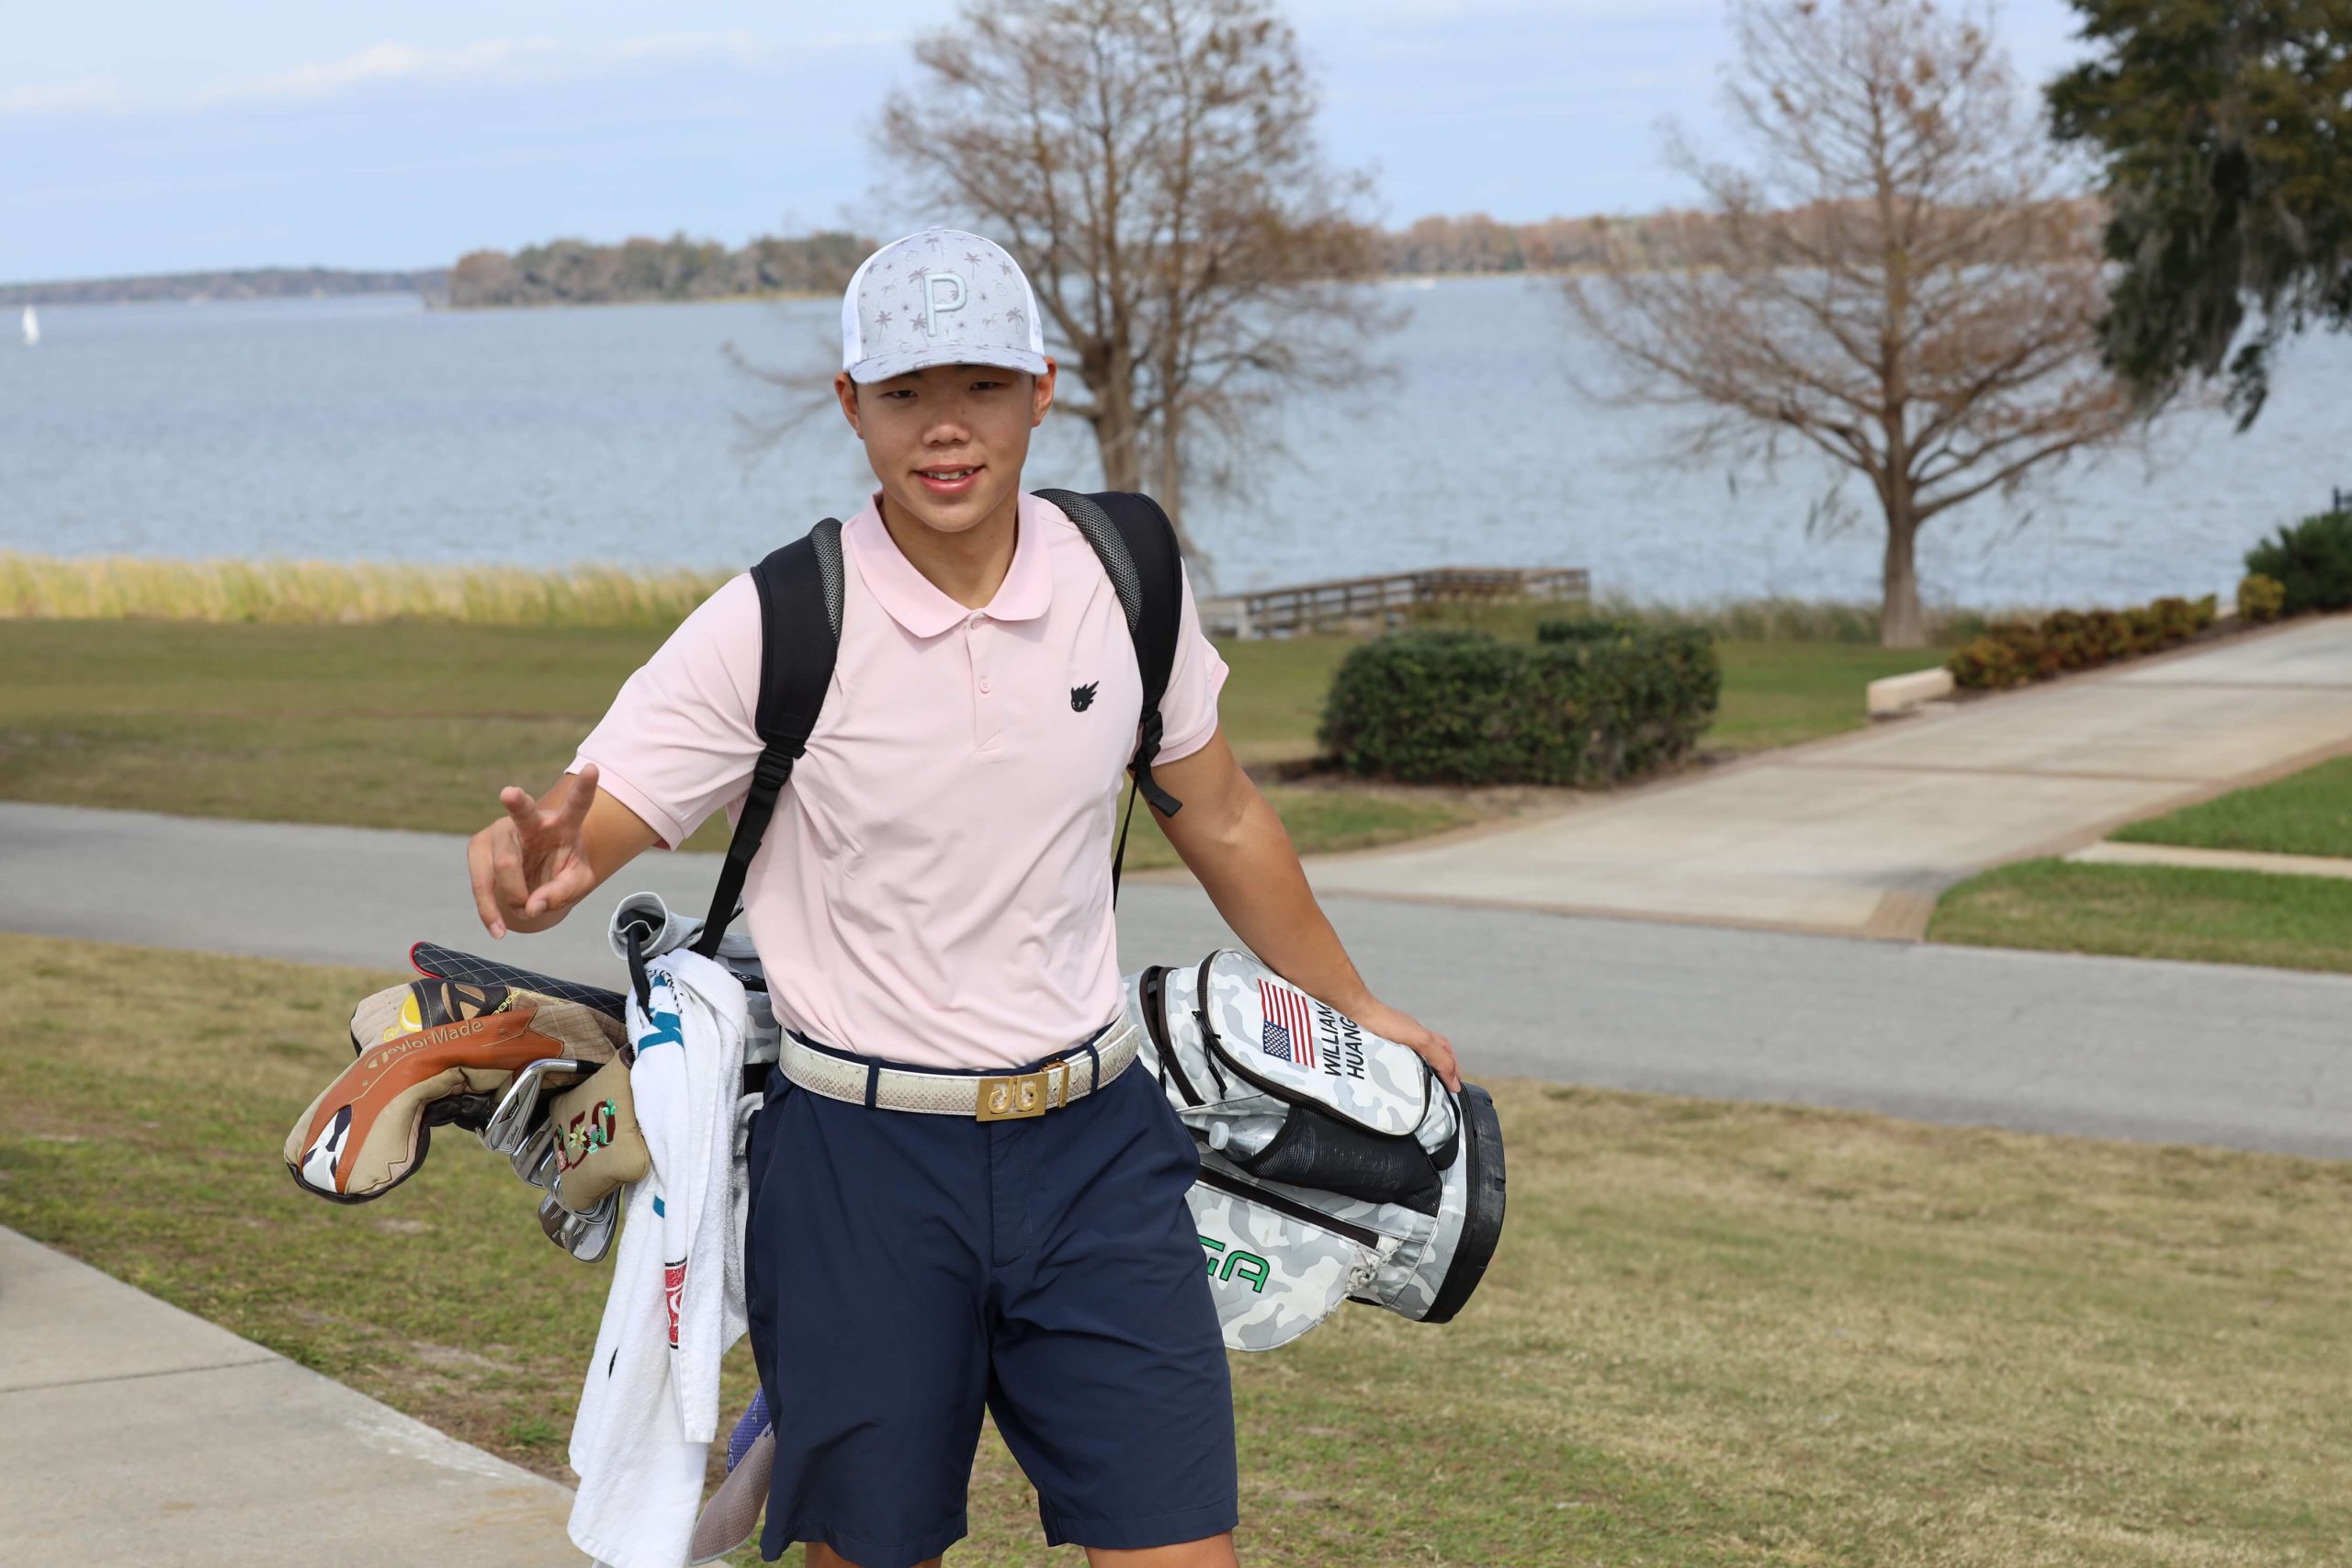 A golfer holding an IJGA bag walks on the course and gives a peace sign to the camera